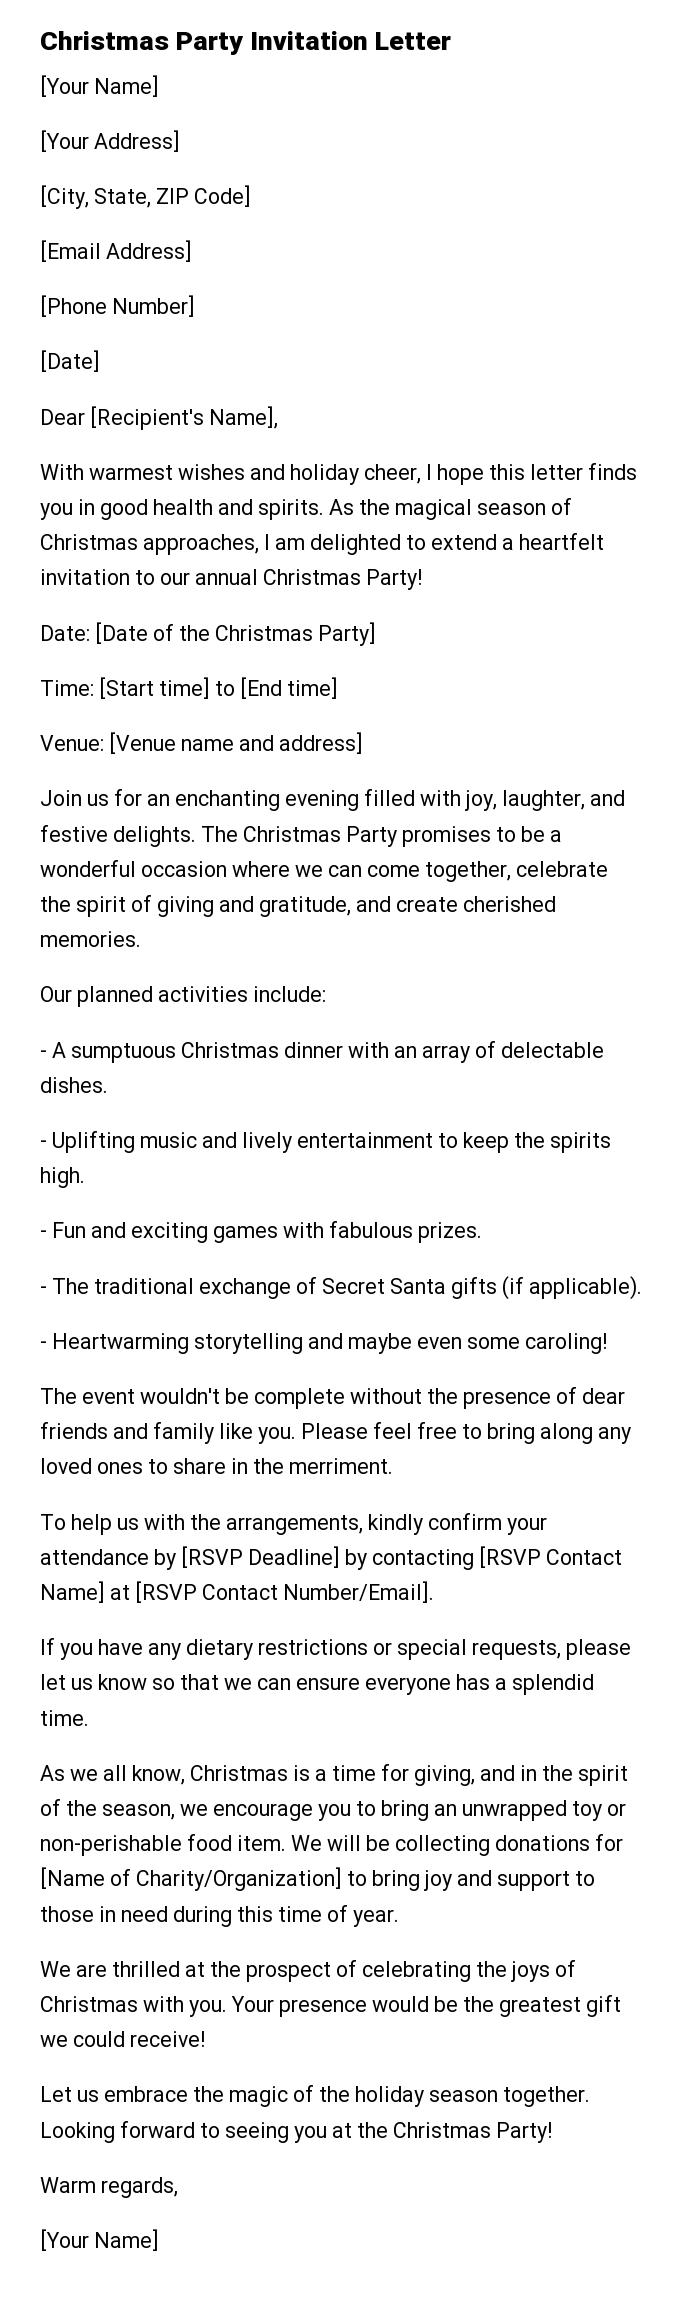 Christmas Party Invitation Letter